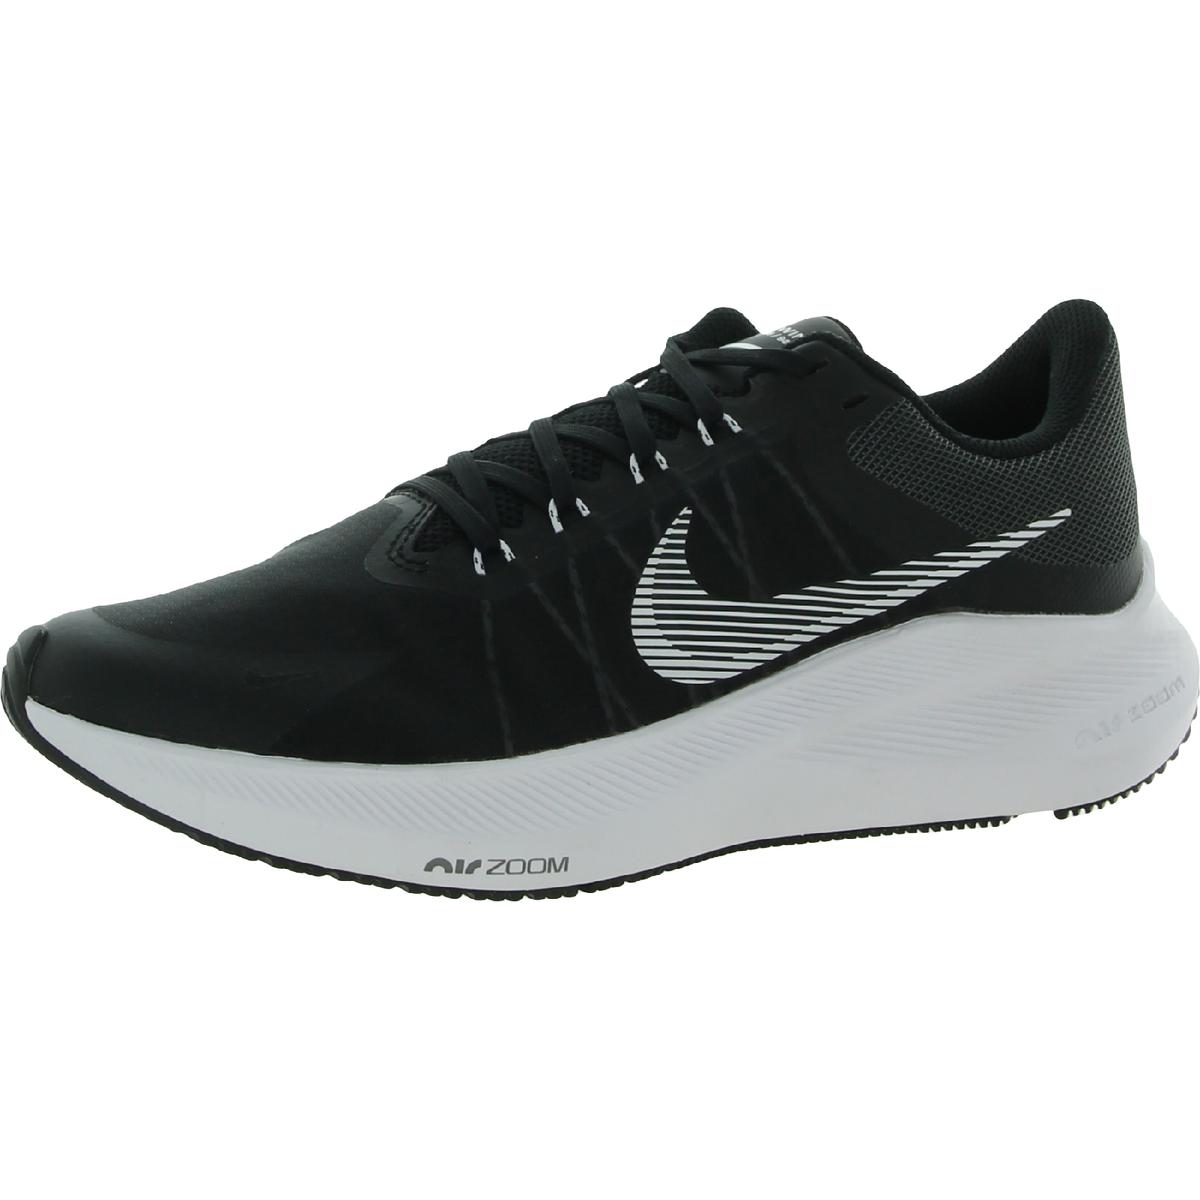 Nike Zoom Winflo 8 Womens Fitness Workout Running Shoes